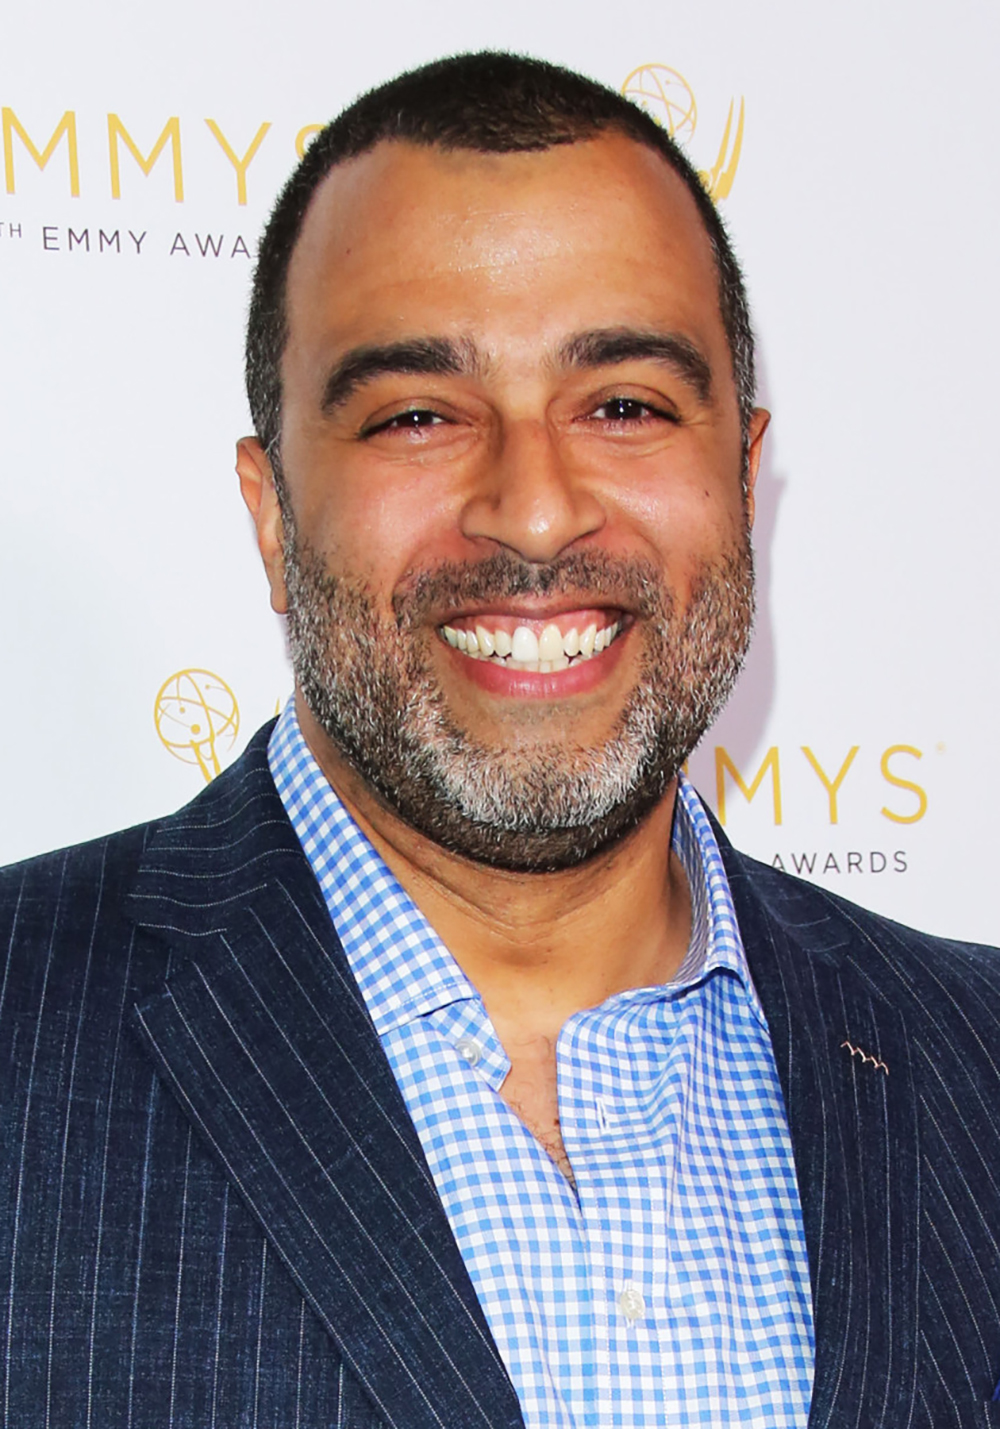 Actor Anthony Mendez attends the Television Academy's cocktail reception to celebrate the 67th Emmy Awards at The Montage Beverly Hills on August 24, 2015 in Beverly Hills, California.